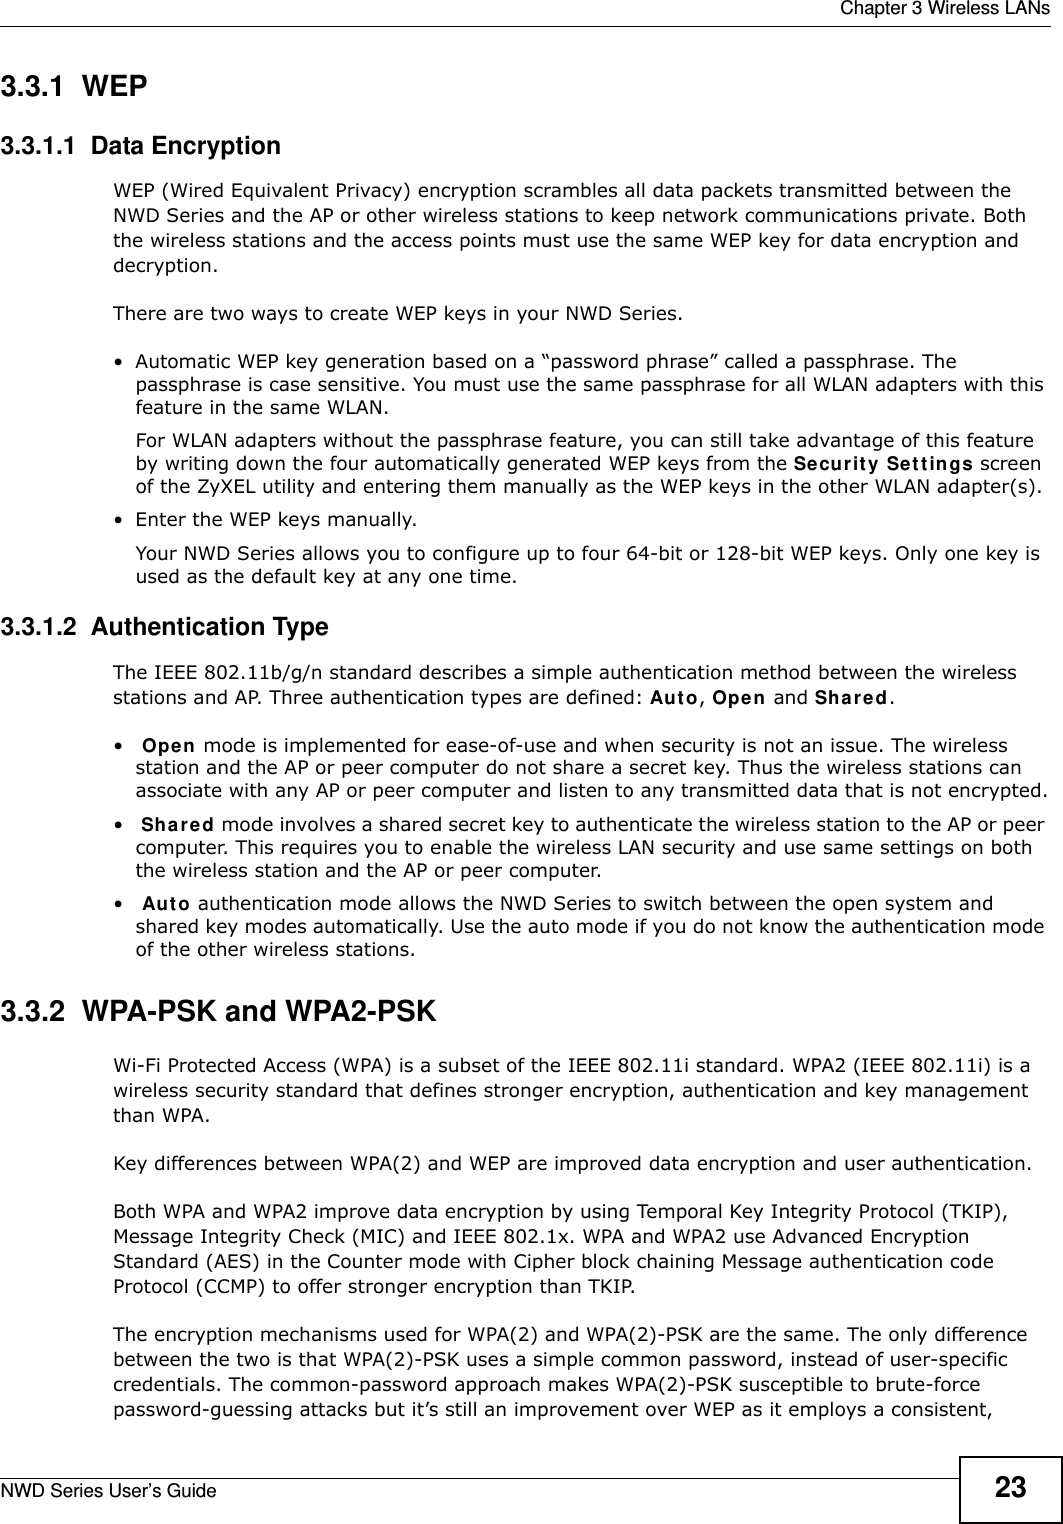  Chapter 3 Wireless LANsNWD Series User’s Guide 233.3.1  WEP3.3.1.1  Data Encryption WEP (Wired Equivalent Privacy) encryption scrambles all data packets transmitted between the NWD Series and the AP or other wireless stations to keep network communications private. Both the wireless stations and the access points must use the same WEP key for data encryption and decryption.There are two ways to create WEP keys in your NWD Series.• Automatic WEP key generation based on a “password phrase” called a passphrase. The passphrase is case sensitive. You must use the same passphrase for all WLAN adapters with this feature in the same WLAN.For WLAN adapters without the passphrase feature, you can still take advantage of this feature by writing down the four automatically generated WEP keys from the Security Settings screen of the ZyXEL utility and entering them manually as the WEP keys in the other WLAN adapter(s).• Enter the WEP keys manually.Your NWD Series allows you to configure up to four 64-bit or 128-bit WEP keys. Only one key is used as the default key at any one time.3.3.1.2  Authentication Type The IEEE 802.11b/g/n standard describes a simple authentication method between the wireless stations and AP. Three authentication types are defined: Auto, Open and Shared.• Open mode is implemented for ease-of-use and when security is not an issue. The wireless station and the AP or peer computer do not share a secret key. Thus the wireless stations can associate with any AP or peer computer and listen to any transmitted data that is not encrypted.• Shared mode involves a shared secret key to authenticate the wireless station to the AP or peer computer. This requires you to enable the wireless LAN security and use same settings on both the wireless station and the AP or peer computer.• Auto authentication mode allows the NWD Series to switch between the open system and shared key modes automatically. Use the auto mode if you do not know the authentication mode of the other wireless stations.3.3.2  WPA-PSK and WPA2-PSK Wi-Fi Protected Access (WPA) is a subset of the IEEE 802.11i standard. WPA2 (IEEE 802.11i) is a wireless security standard that defines stronger encryption, authentication and key management than WPA. Key differences between WPA(2) and WEP are improved data encryption and user authentication.Both WPA and WPA2 improve data encryption by using Temporal Key Integrity Protocol (TKIP), Message Integrity Check (MIC) and IEEE 802.1x. WPA and WPA2 use Advanced Encryption Standard (AES) in the Counter mode with Cipher block chaining Message authentication code Protocol (CCMP) to offer stronger encryption than TKIP.The encryption mechanisms used for WPA(2) and WPA(2)-PSK are the same. The only difference between the two is that WPA(2)-PSK uses a simple common password, instead of user-specific credentials. The common-password approach makes WPA(2)-PSK susceptible to brute-force password-guessing attacks but it’s still an improvement over WEP as it employs a consistent, 